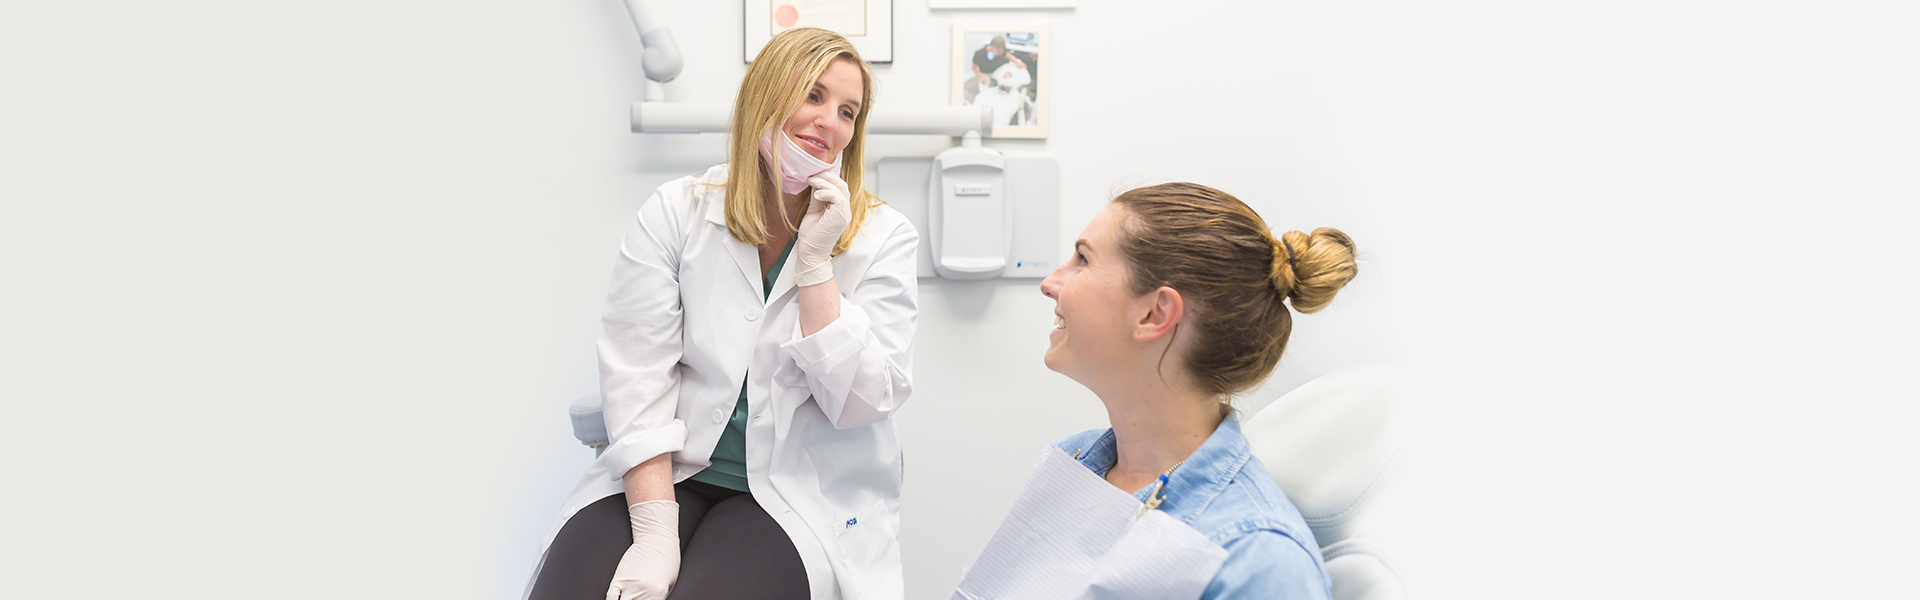 COVID-19 Safety Protocols You Should Anticipate During Your Next Dental Visit